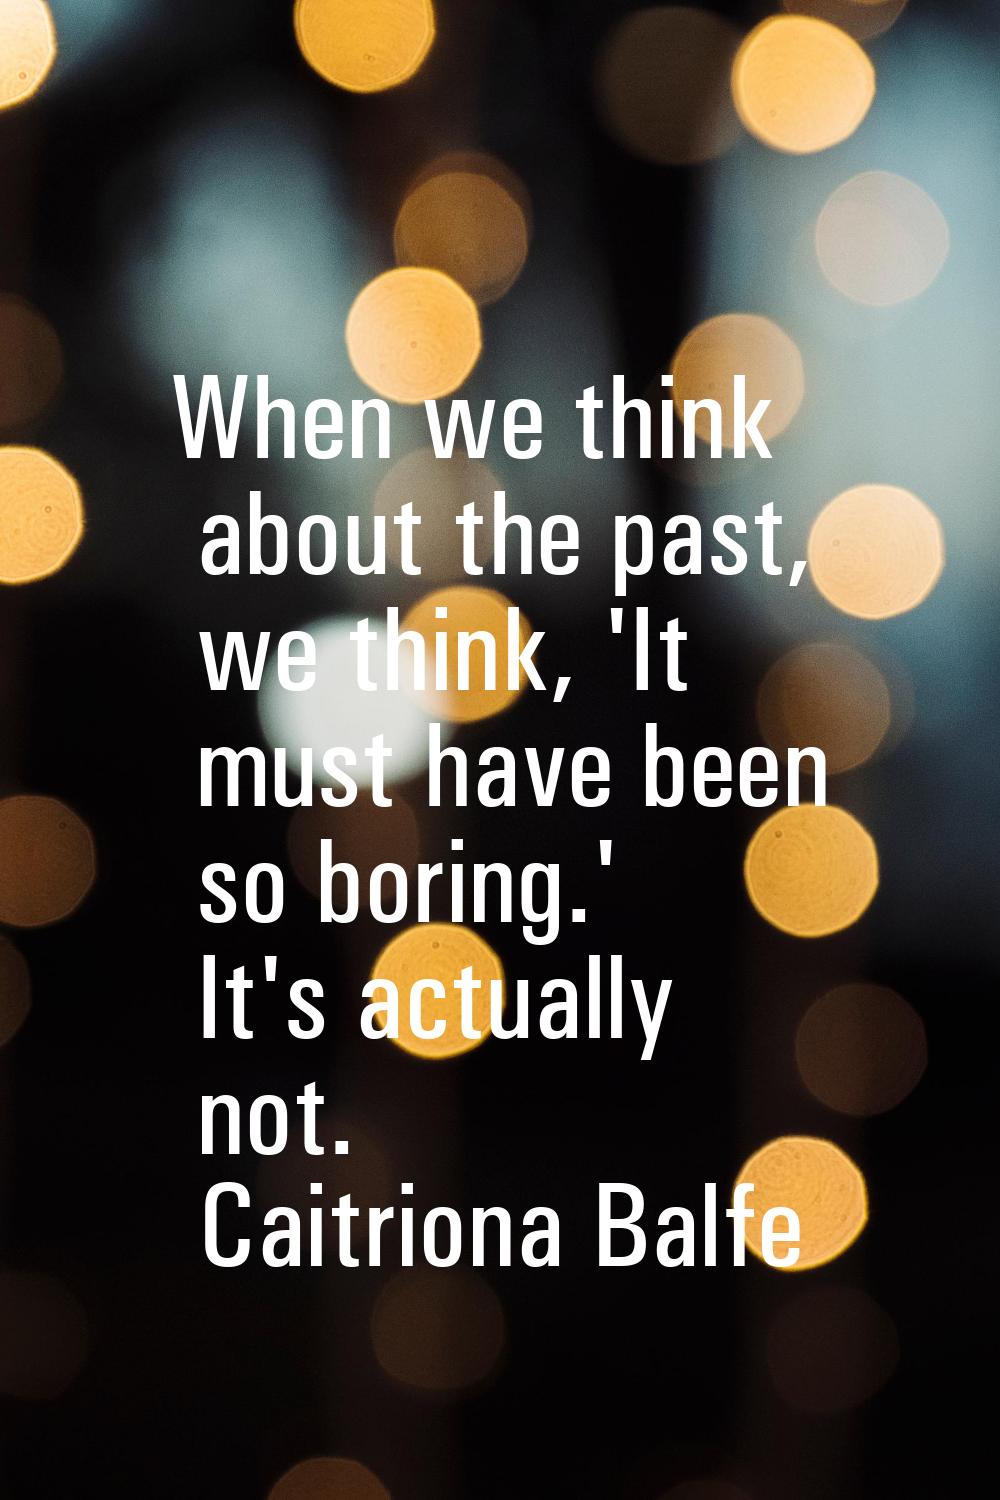 When we think about the past, we think, 'It must have been so boring.' It's actually not.